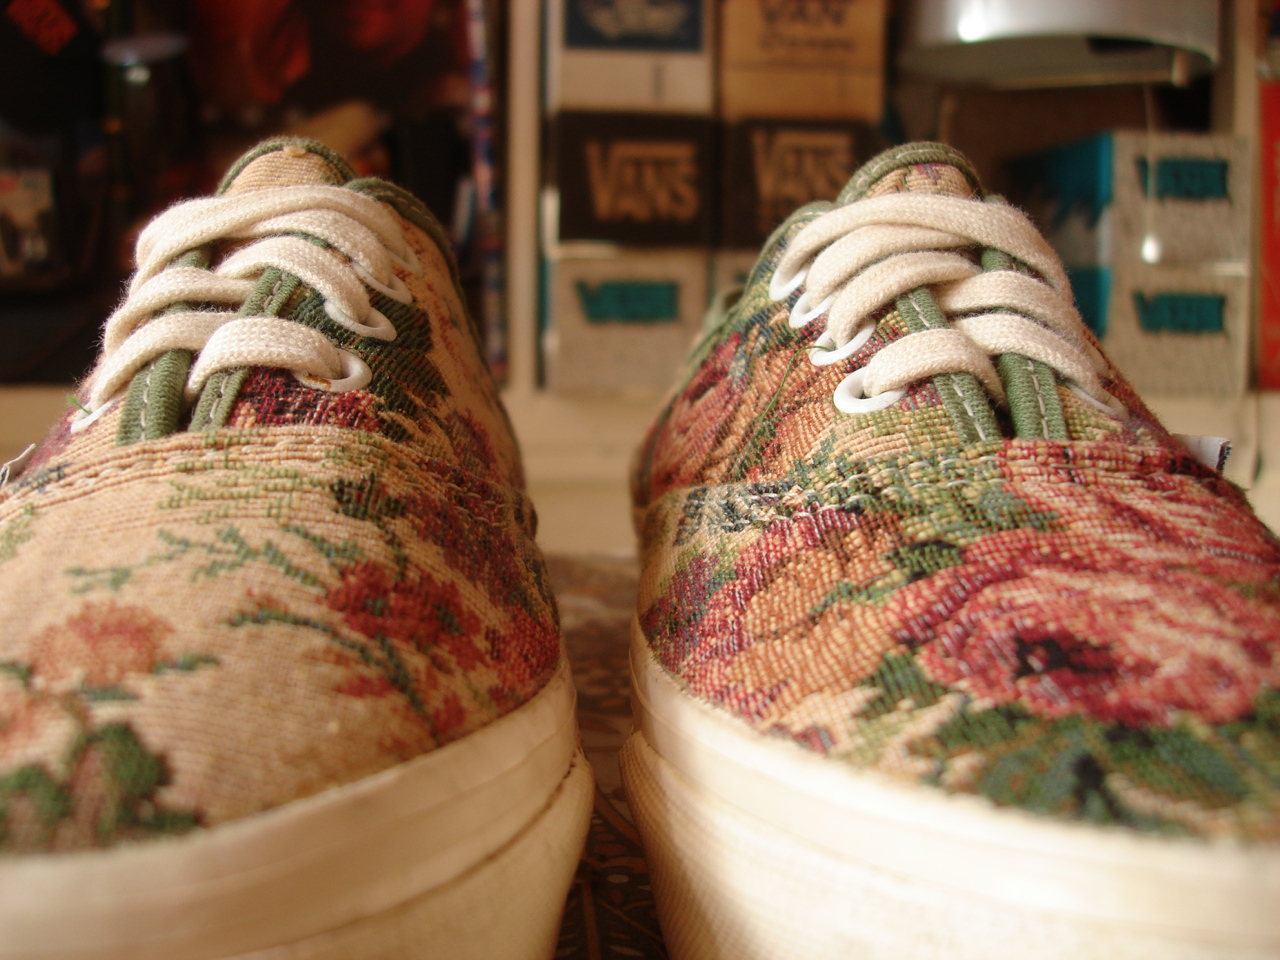 theothersideofthepillow: vintage VANS shoes FLORAL TEA TAPESTRY style